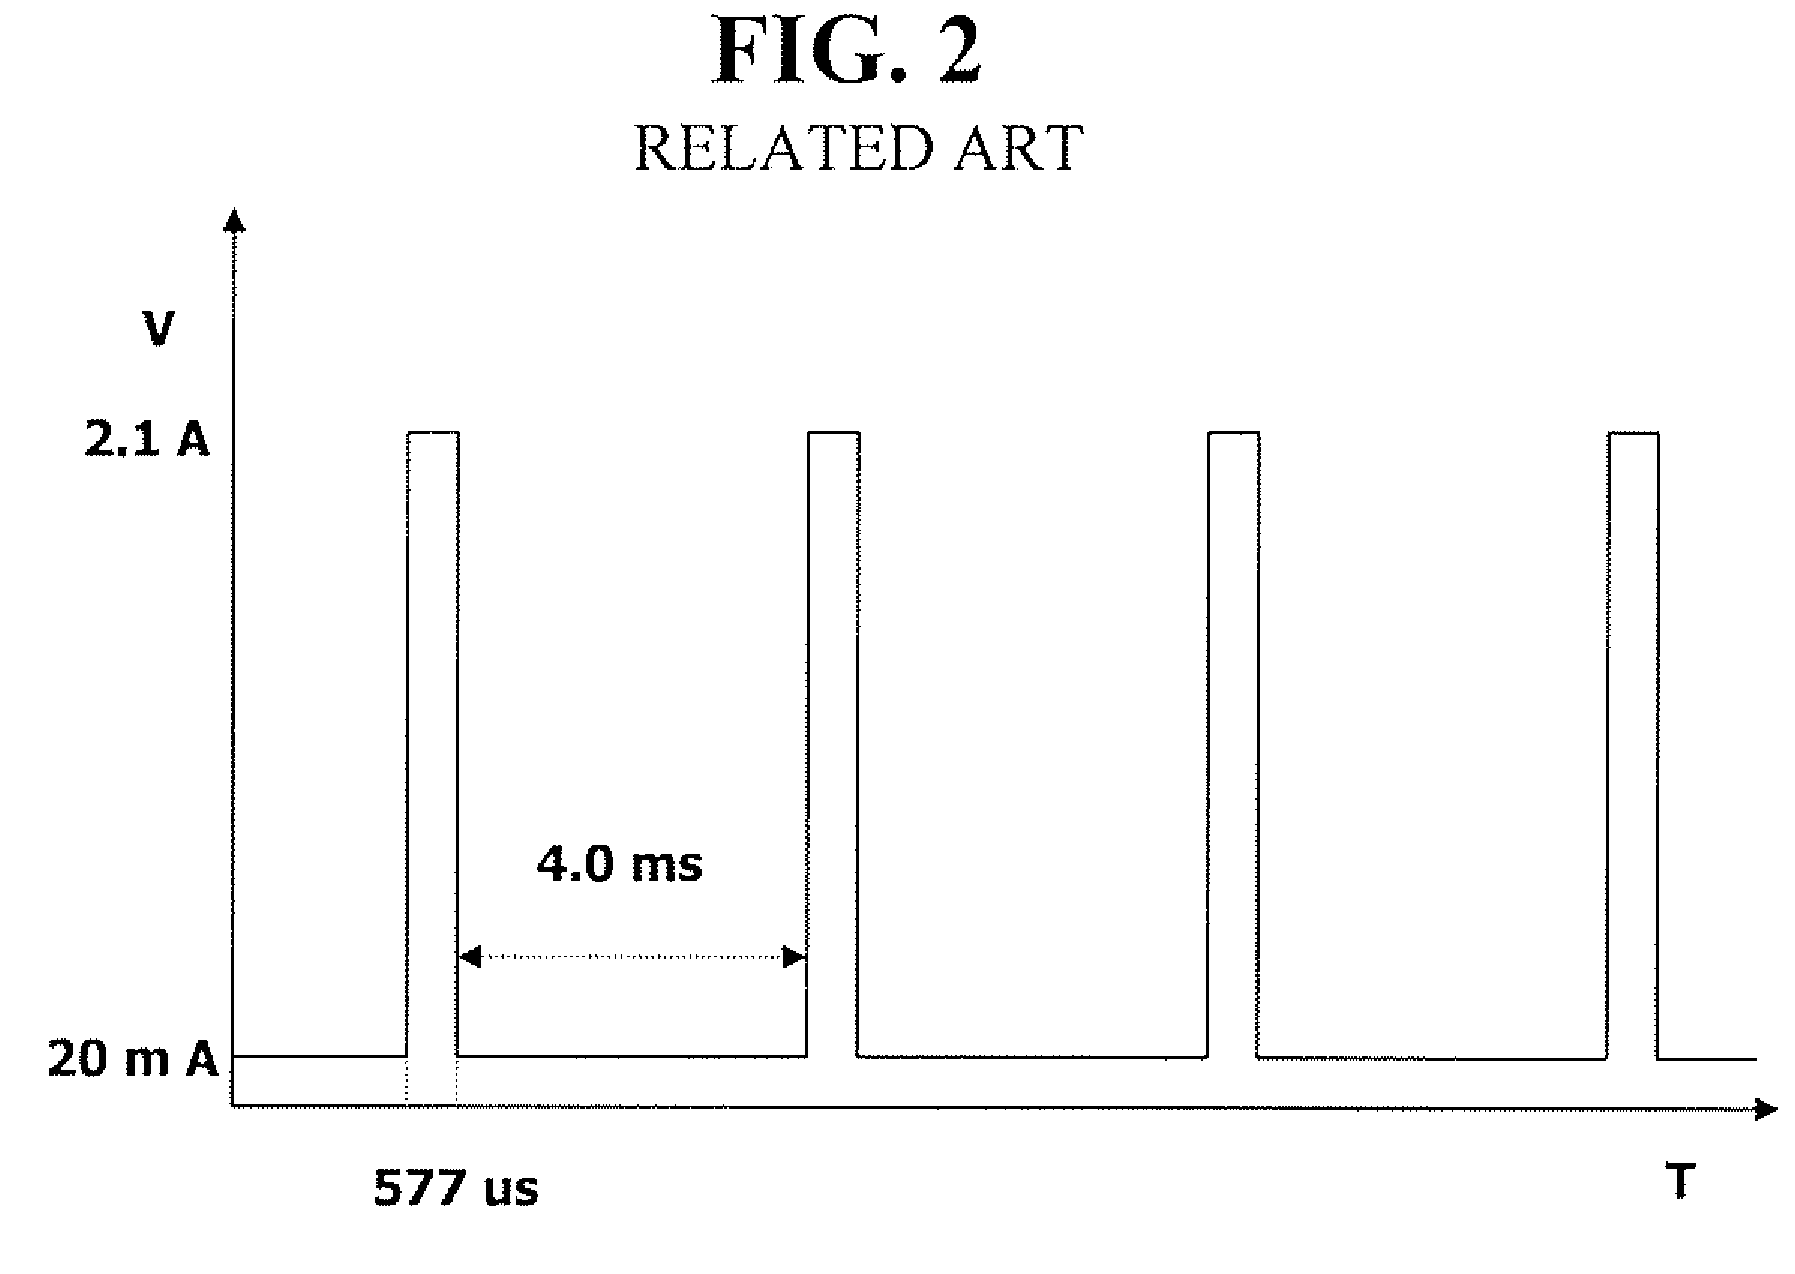 Apparatus and method for conserving battery charge